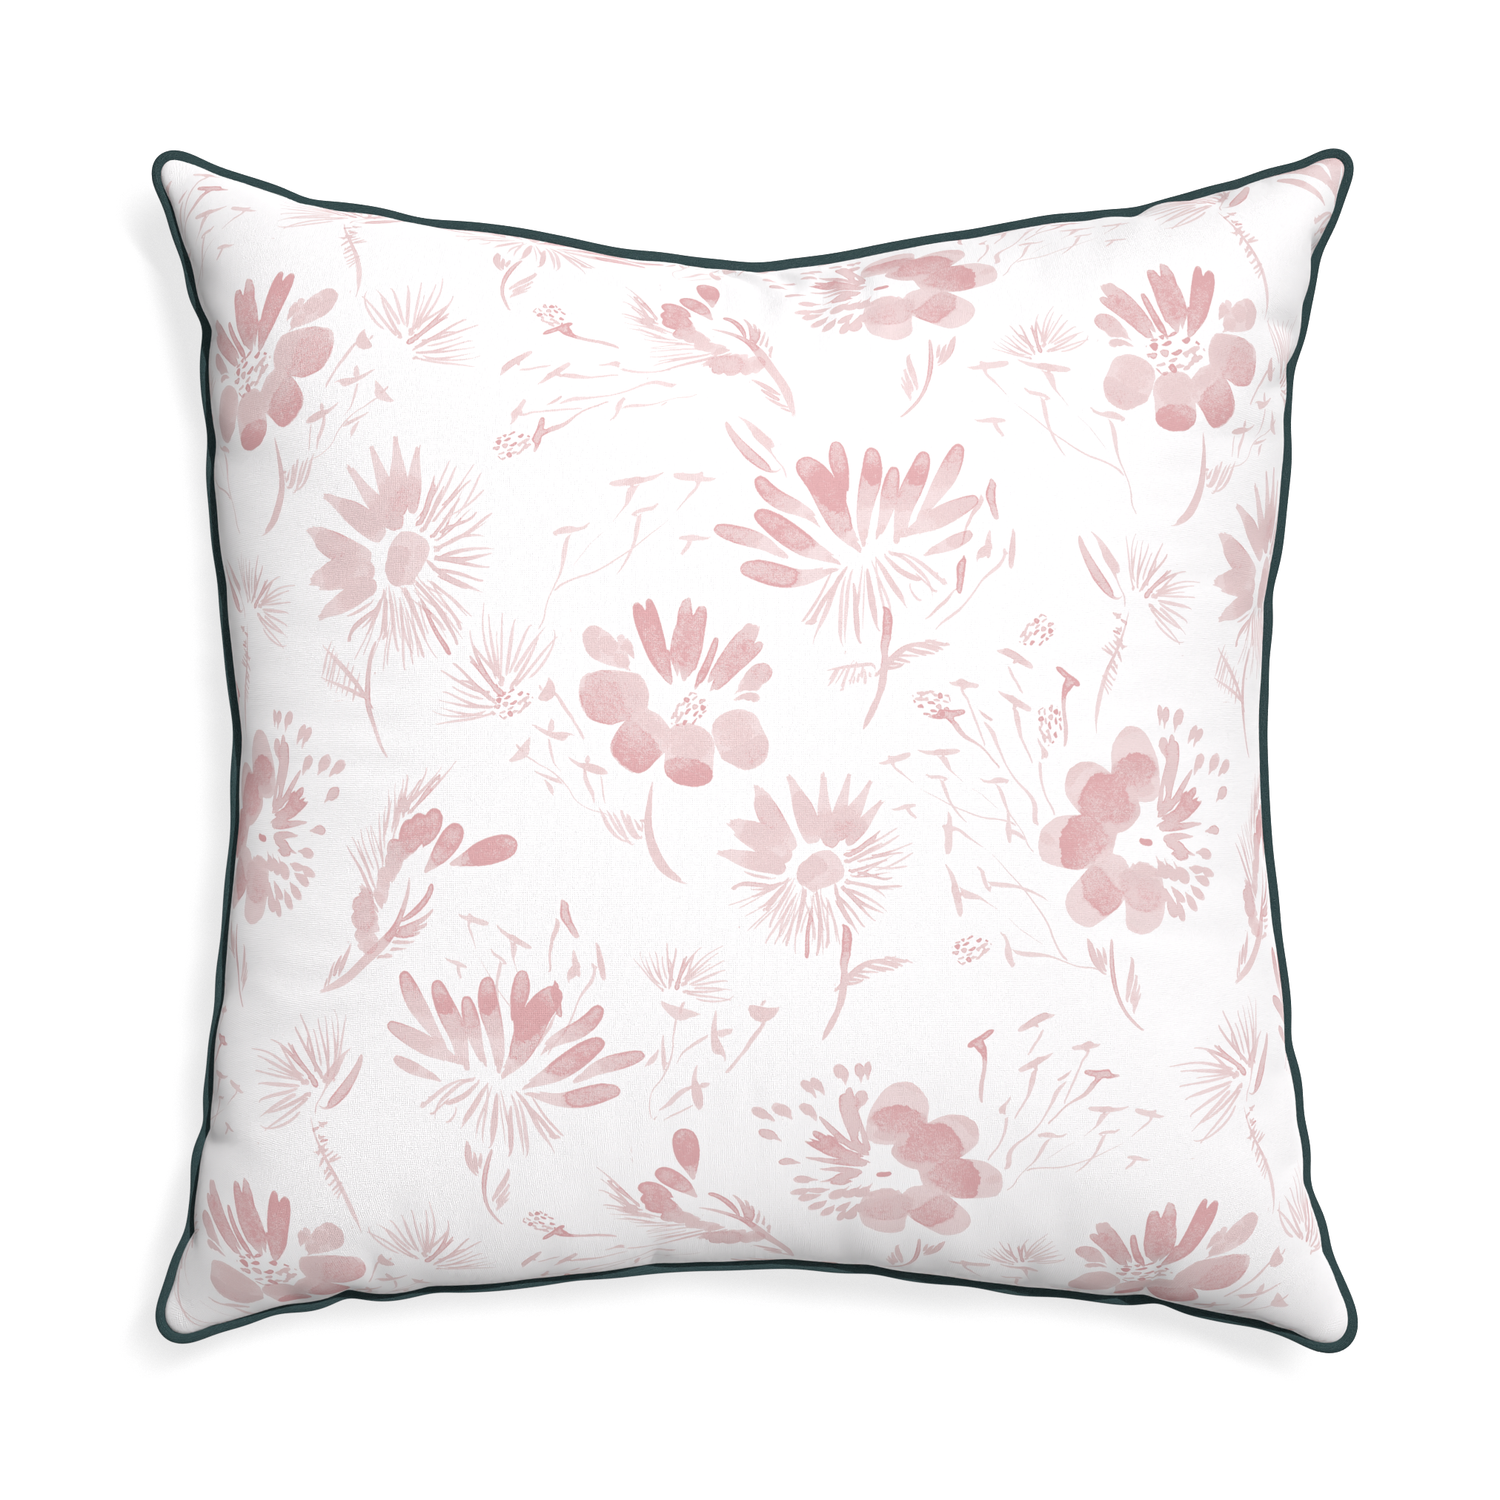 Euro-sham blake custom pink floralpillow with p piping on white background